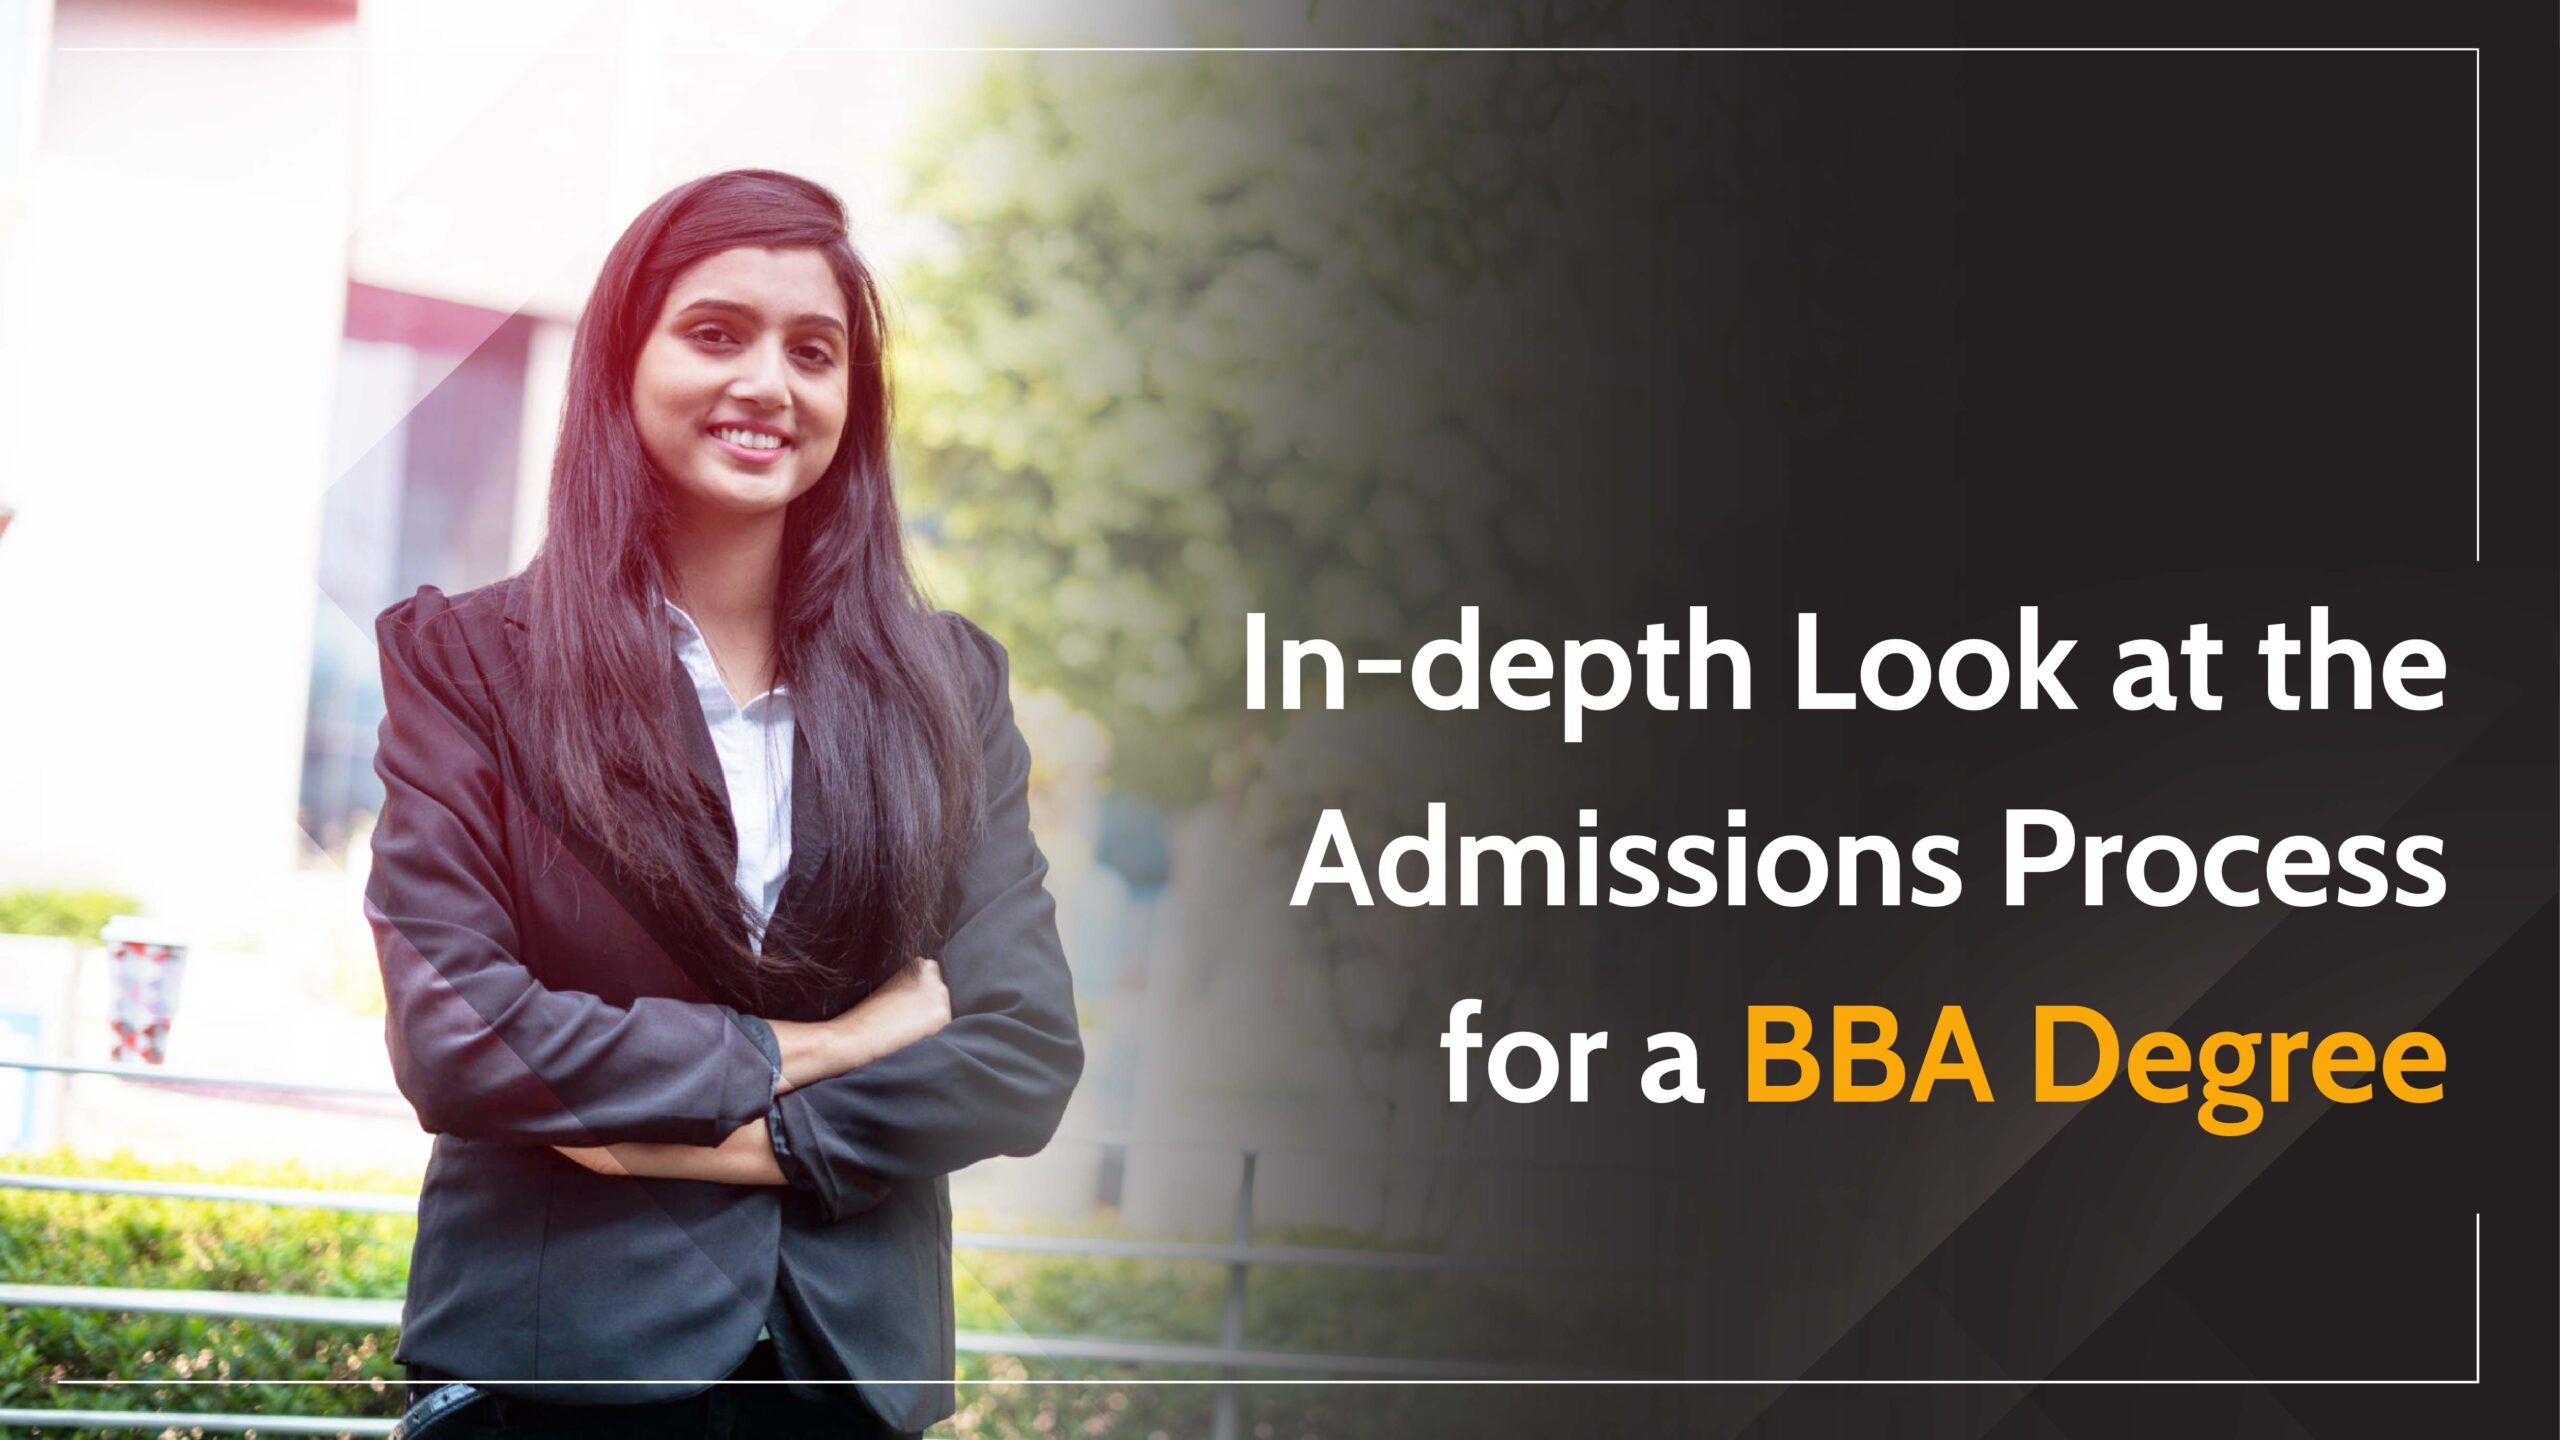 In-depth Look at the Admissions Process for a BBA Degree